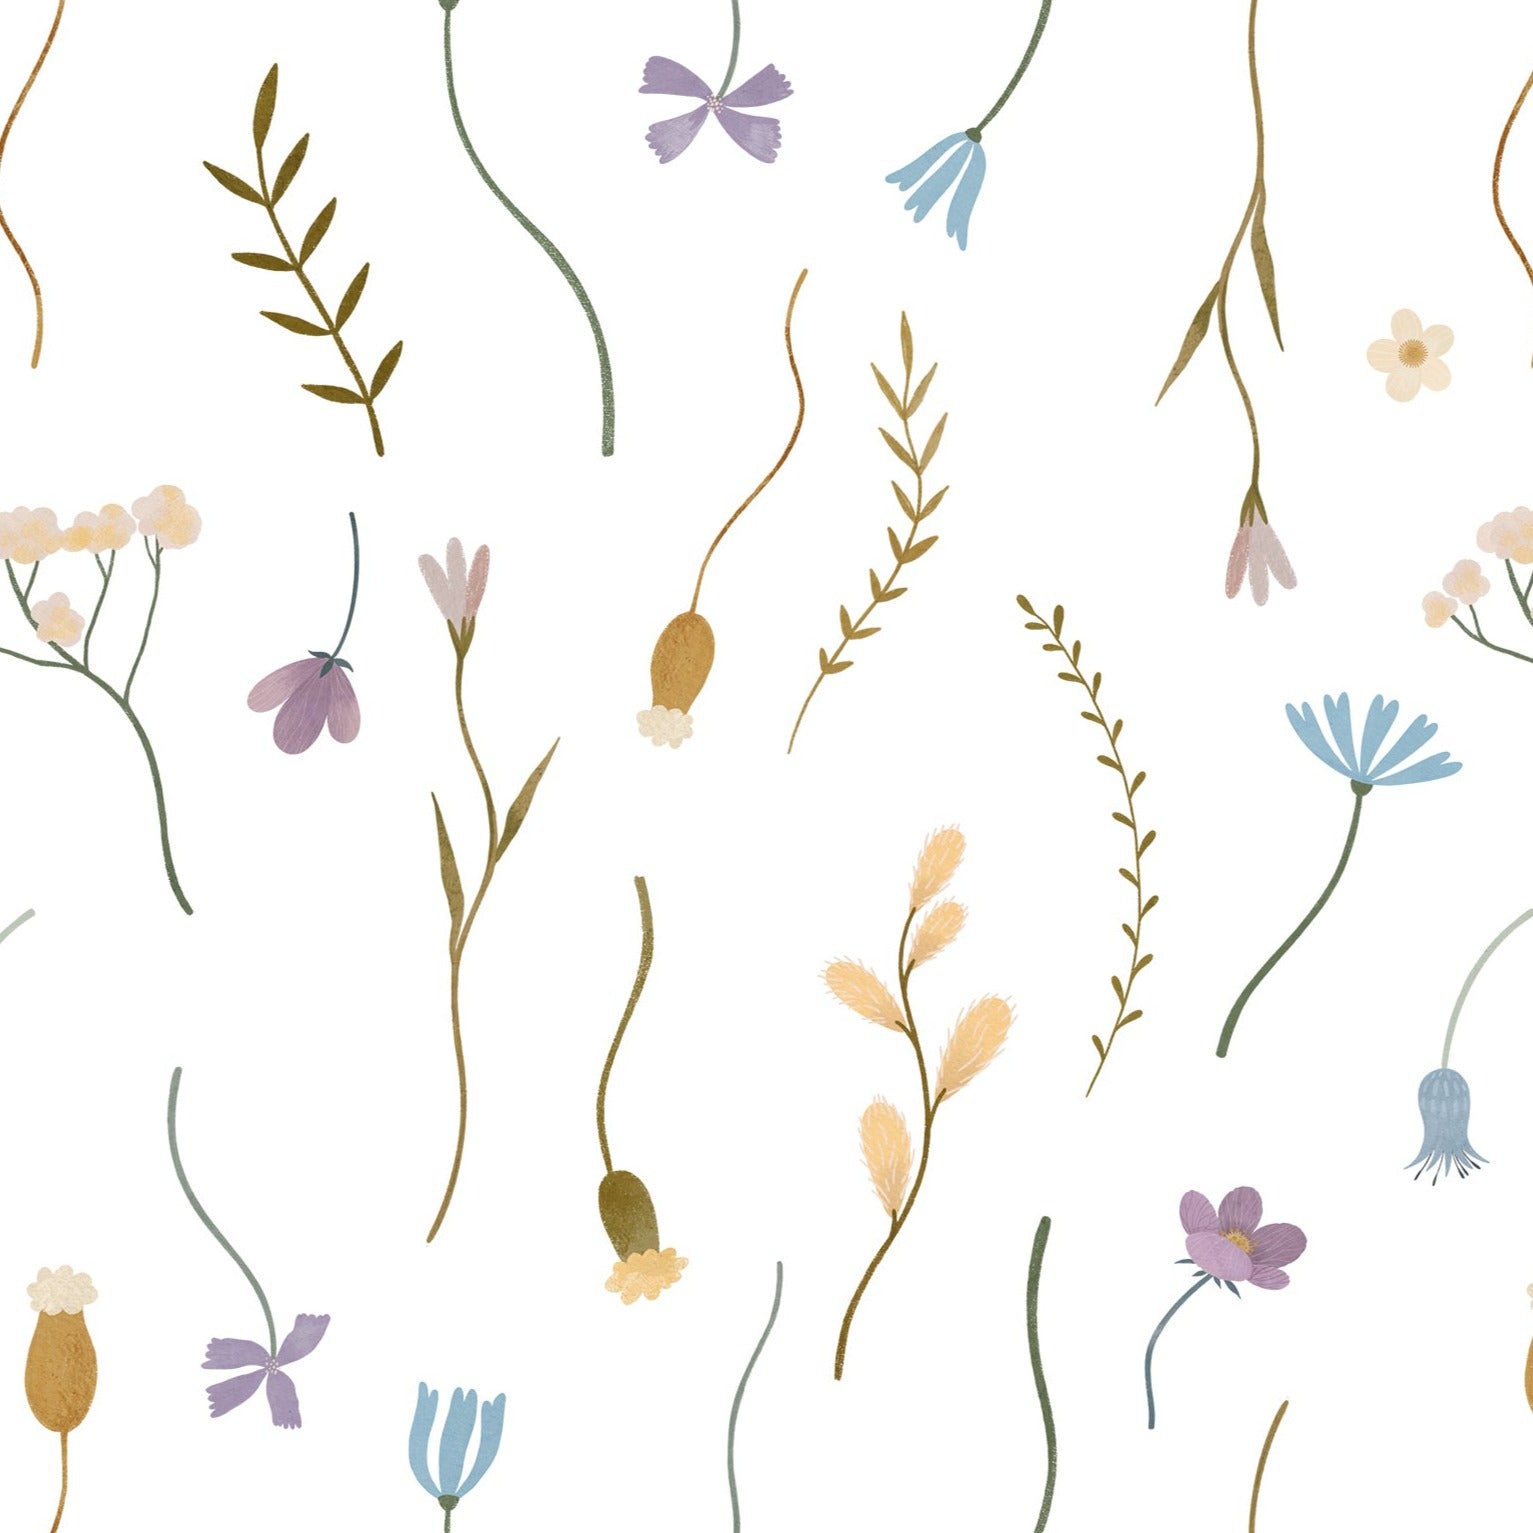 Close-up view of the Minimal Paradise Wallpaper, featuring a whimsical pattern of delicate wildflowers and botanicals in soft pastel hues of purple, yellow, and blue on a white background.